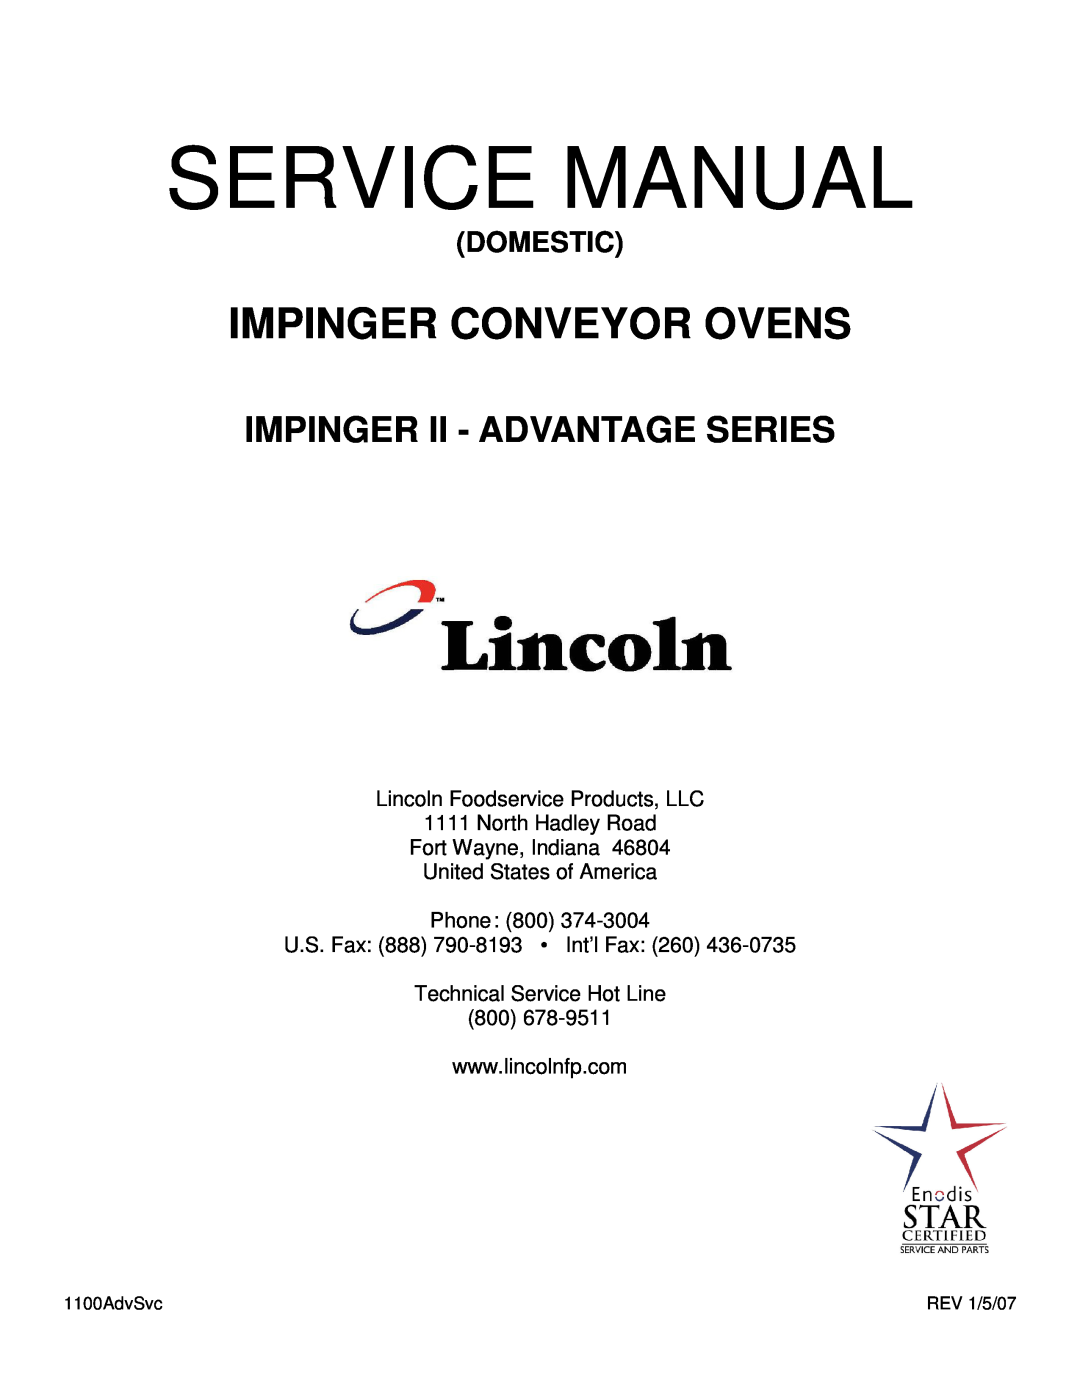 Lincoln 1117-000-A service manual Lincoln Foodservice Products, LLC, North Hadley Road Fort Wayne, Indiana, Domestic 